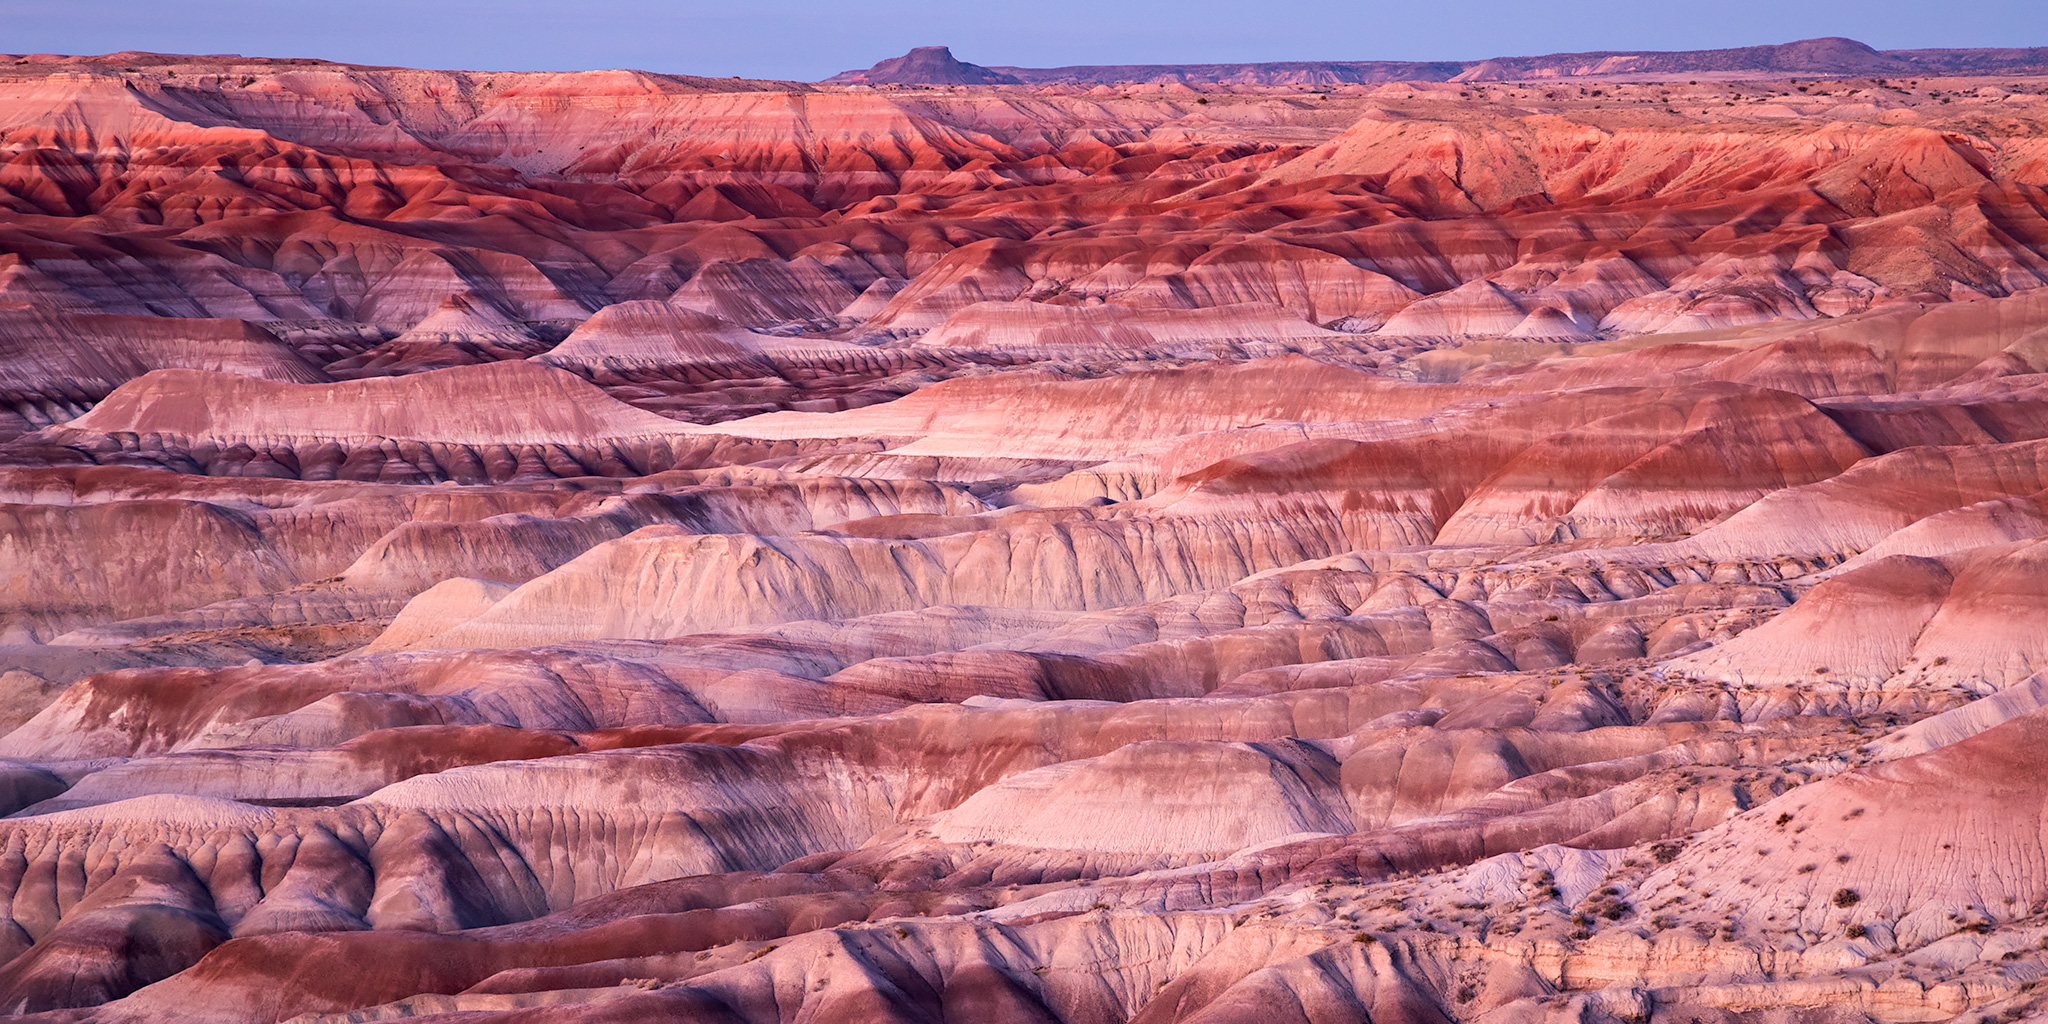 The Painted Desert: Petrified Forest National Park